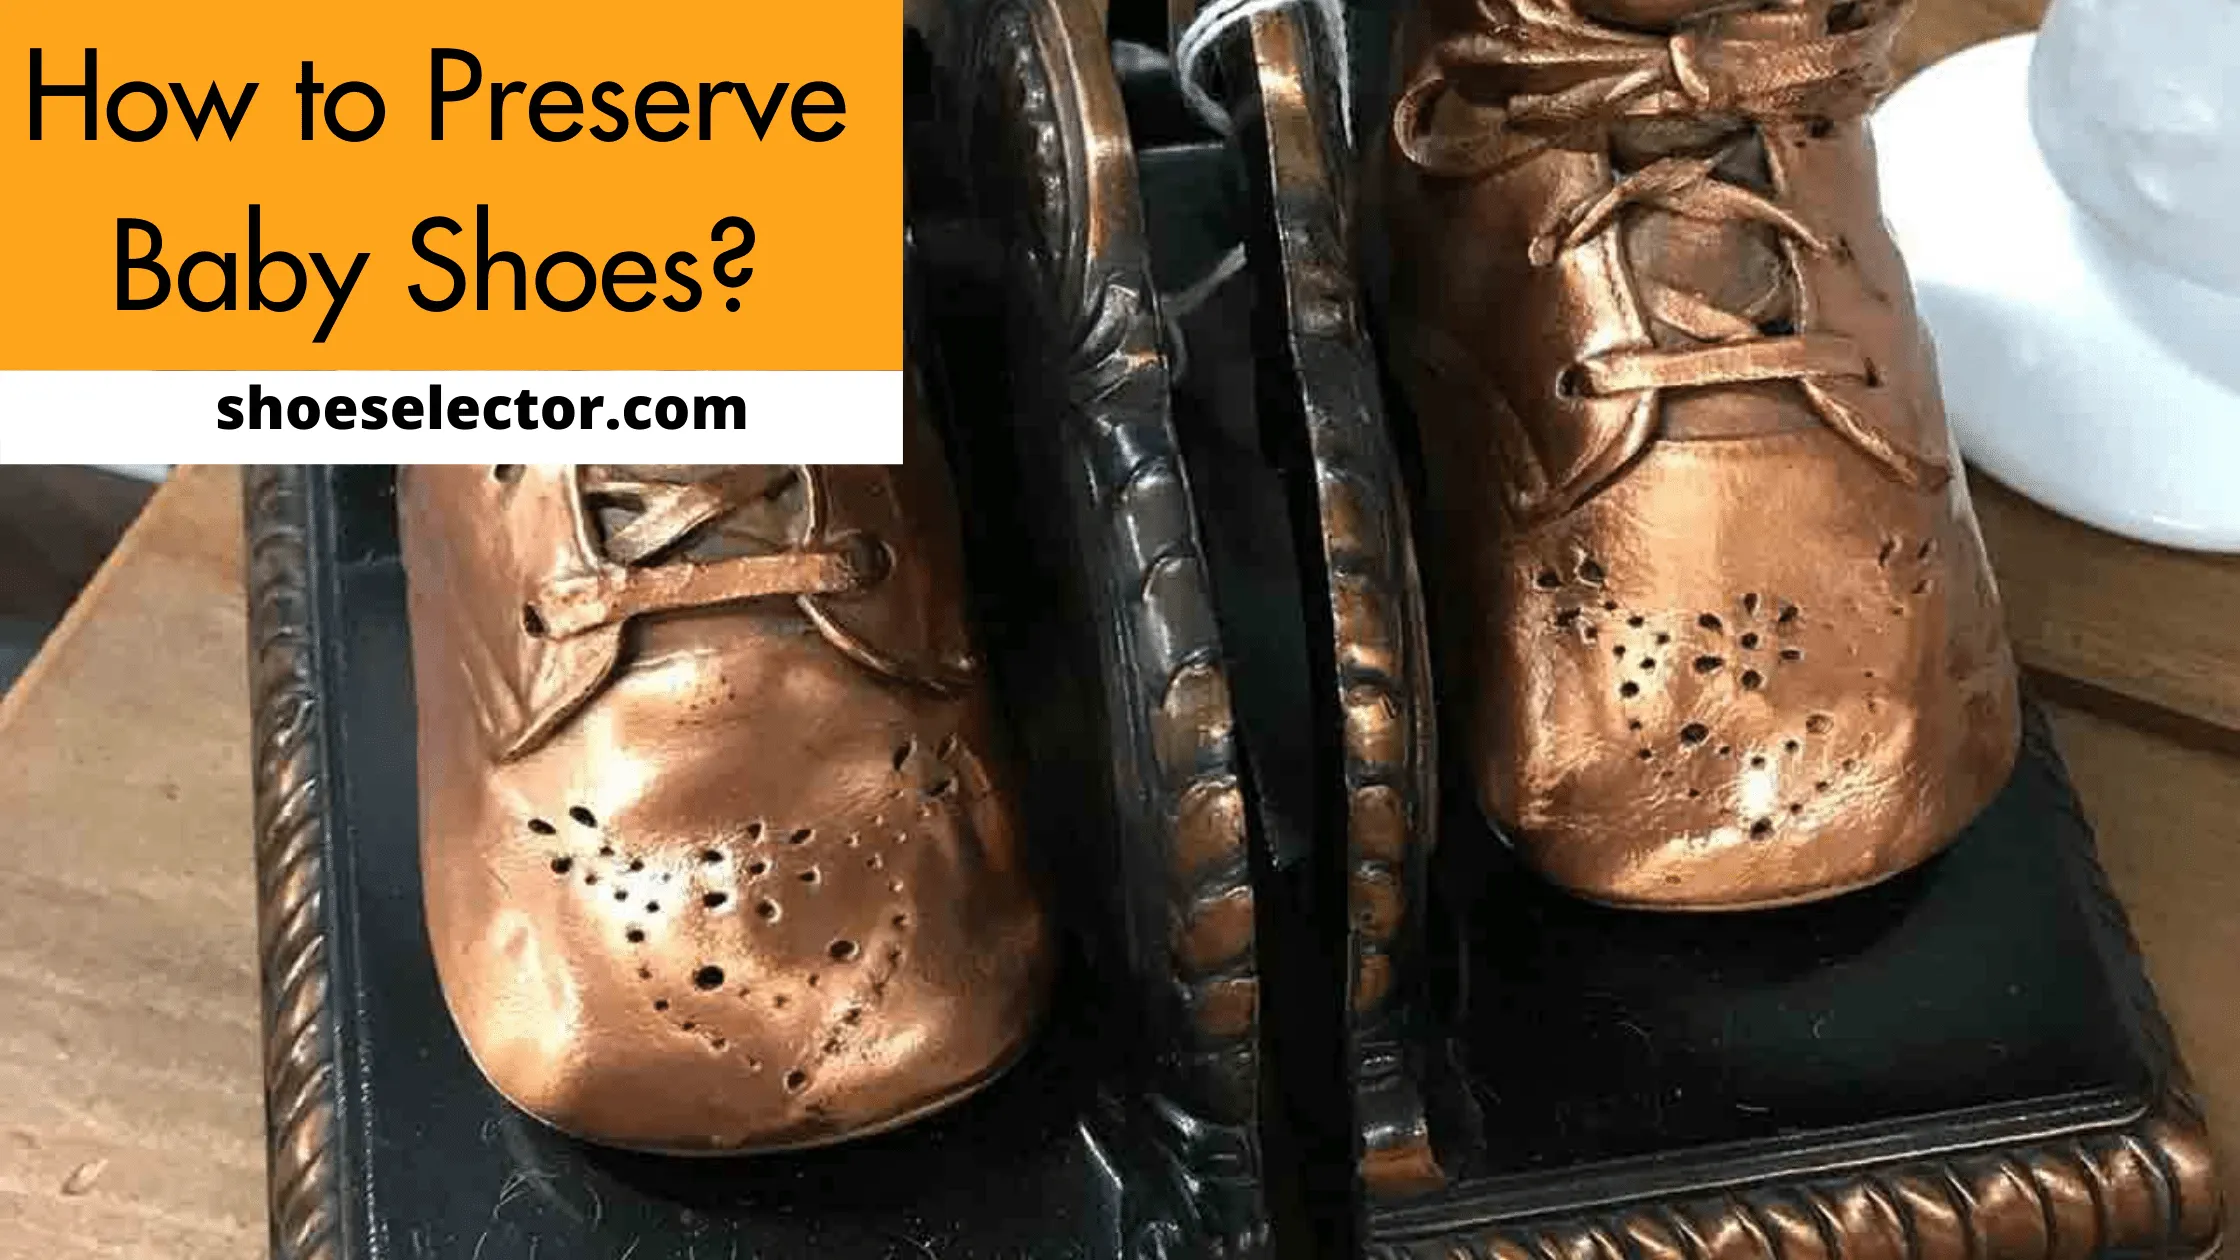 How to Preserve Baby Shoes? - Solution Guide